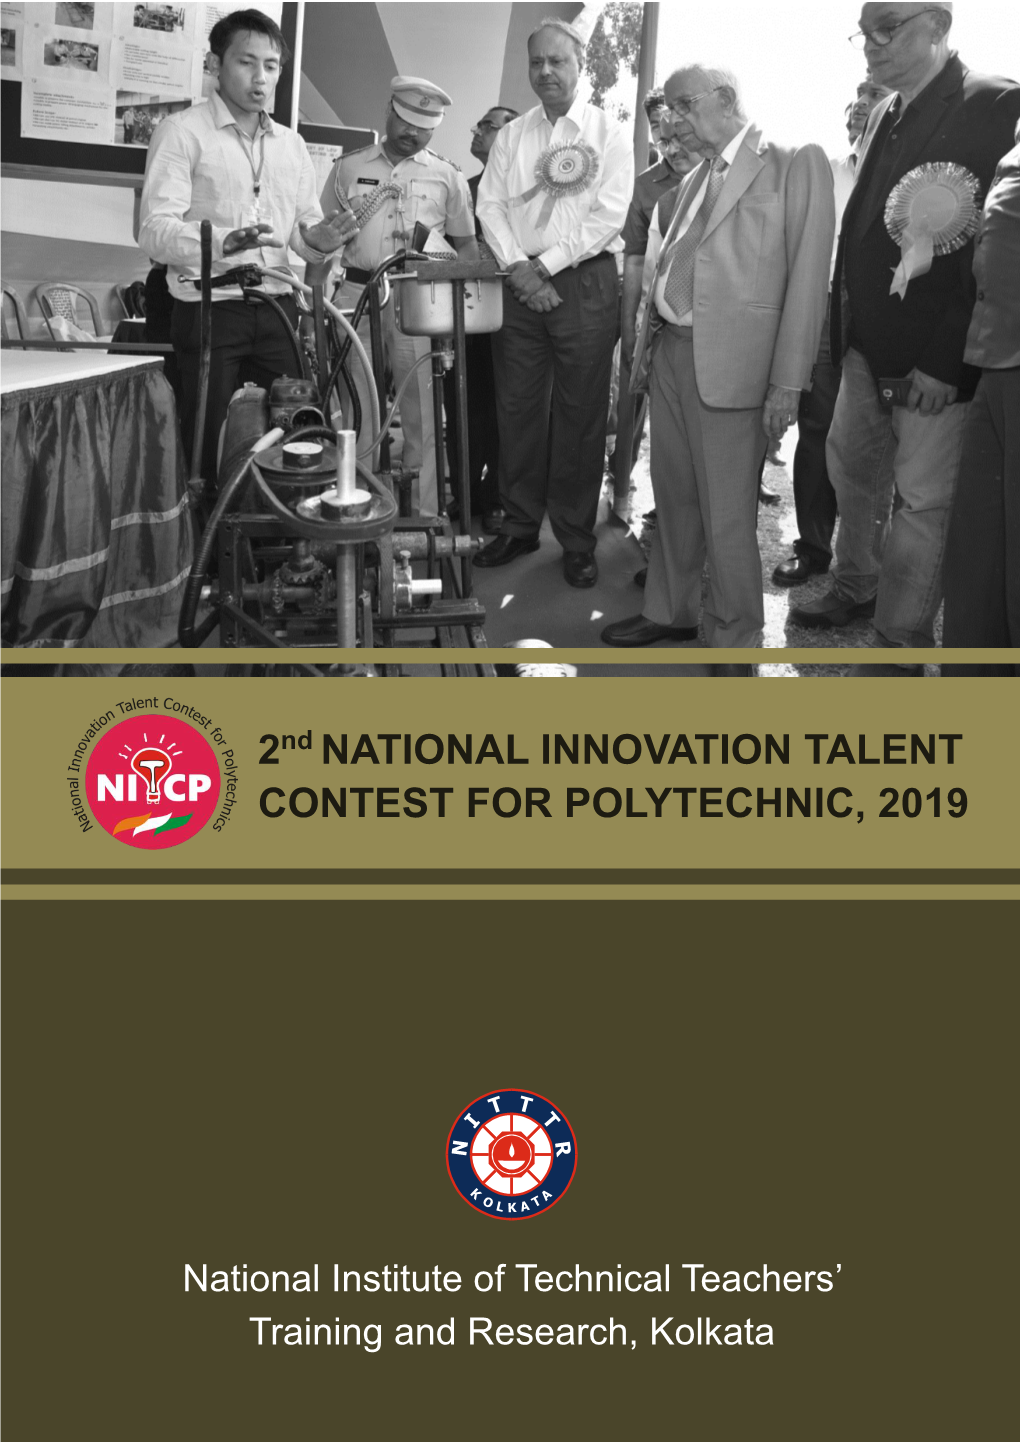 National Innovation Talent Contest for Polytechnics in This Year